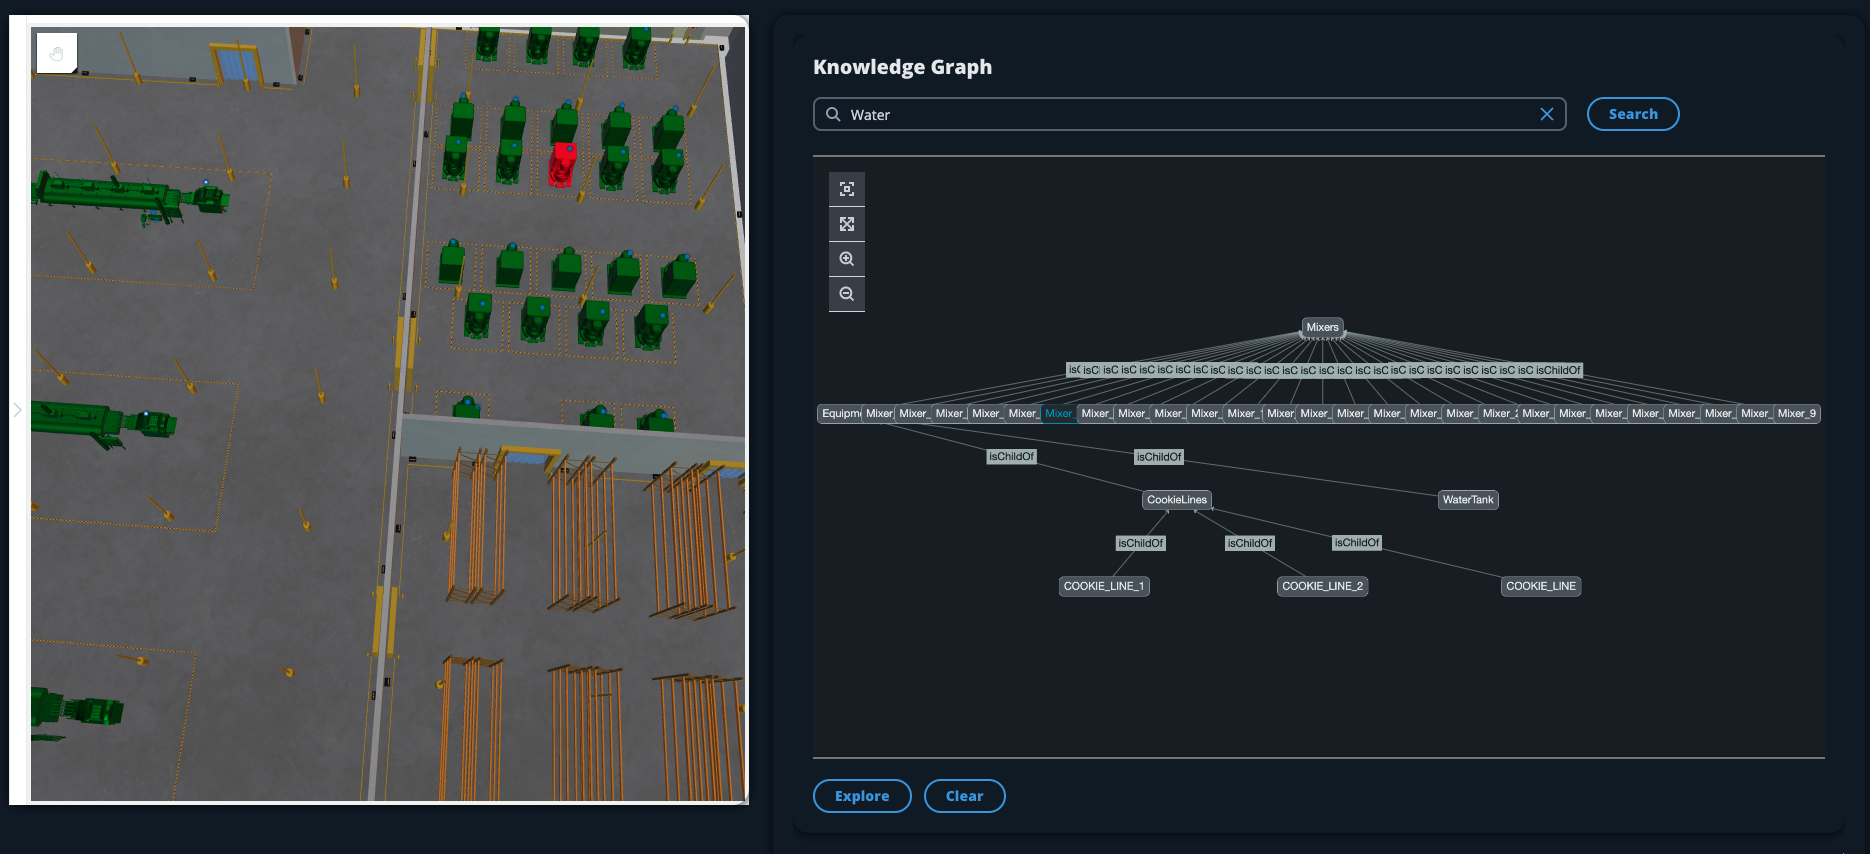 A TwinMaker scene with a knowledge graph showing the relationships between 3D models.